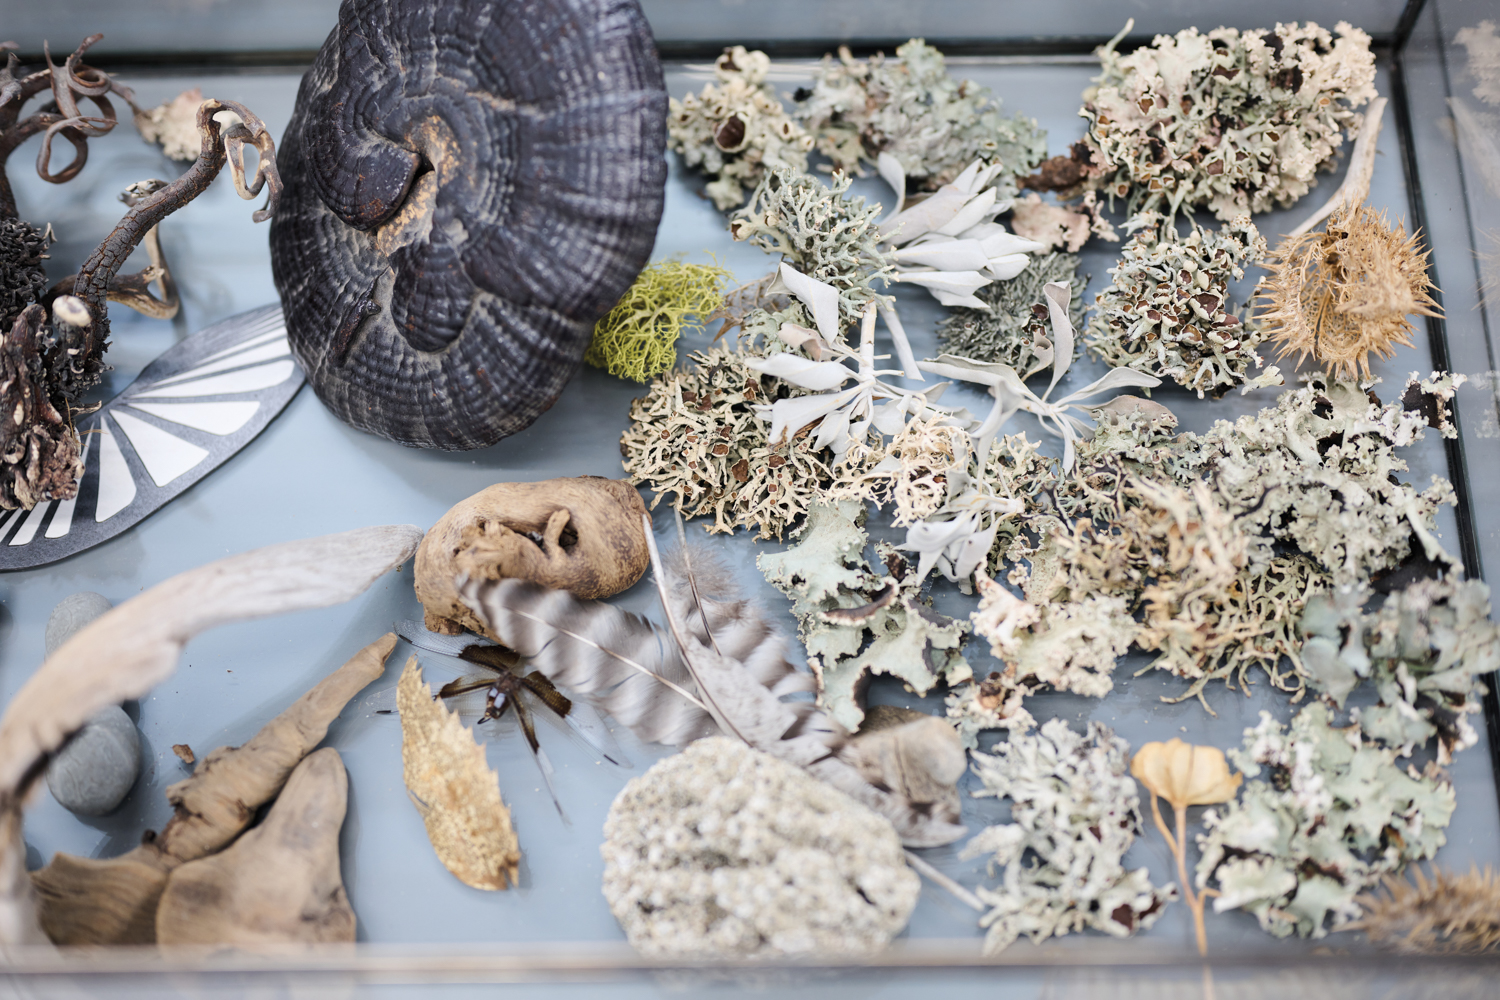 Natural materials in the artist's studio